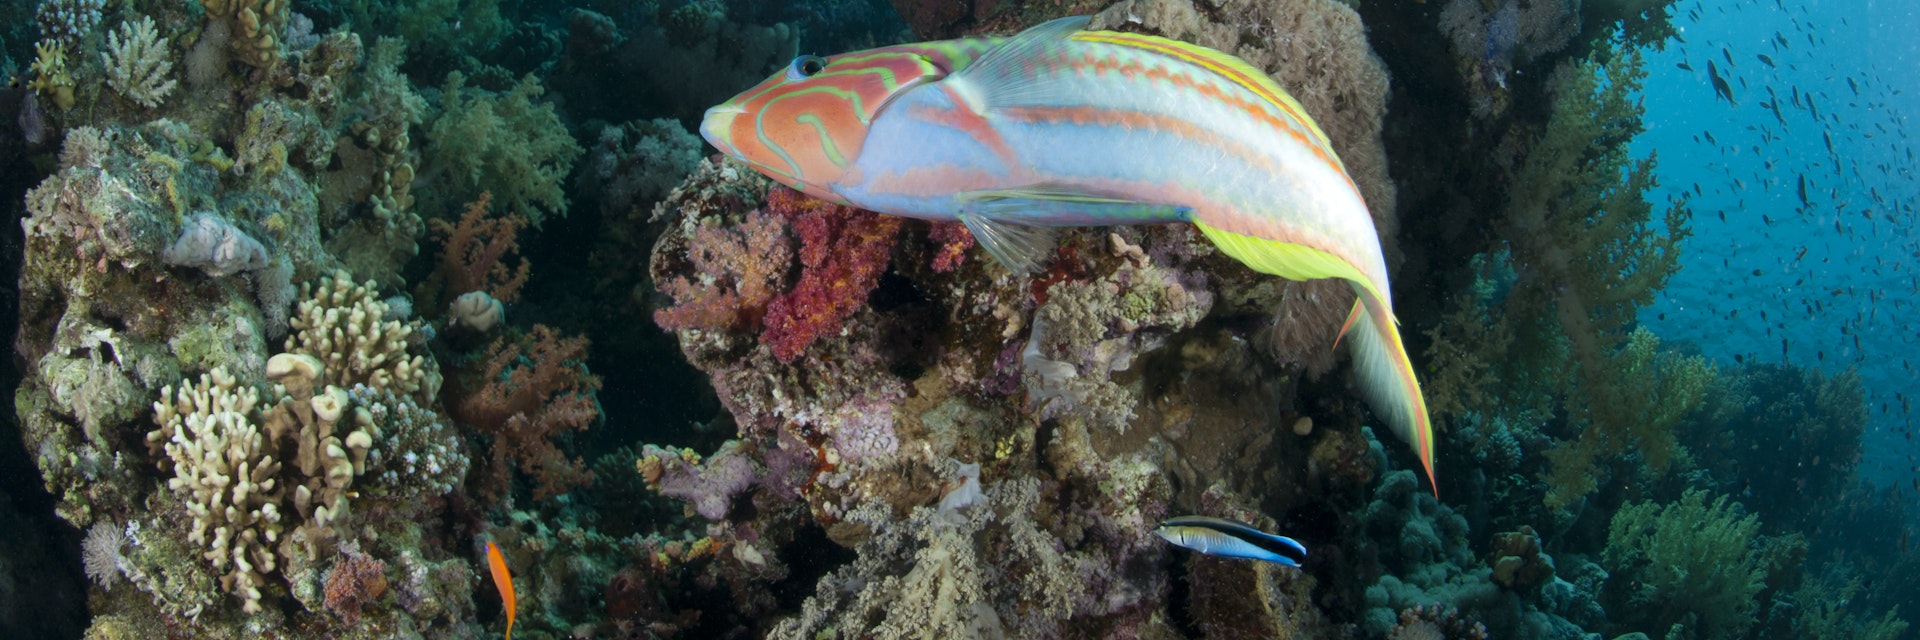 Colorful Rainbow wrasse fish in Thomas reef, Red Sea, Egypt.